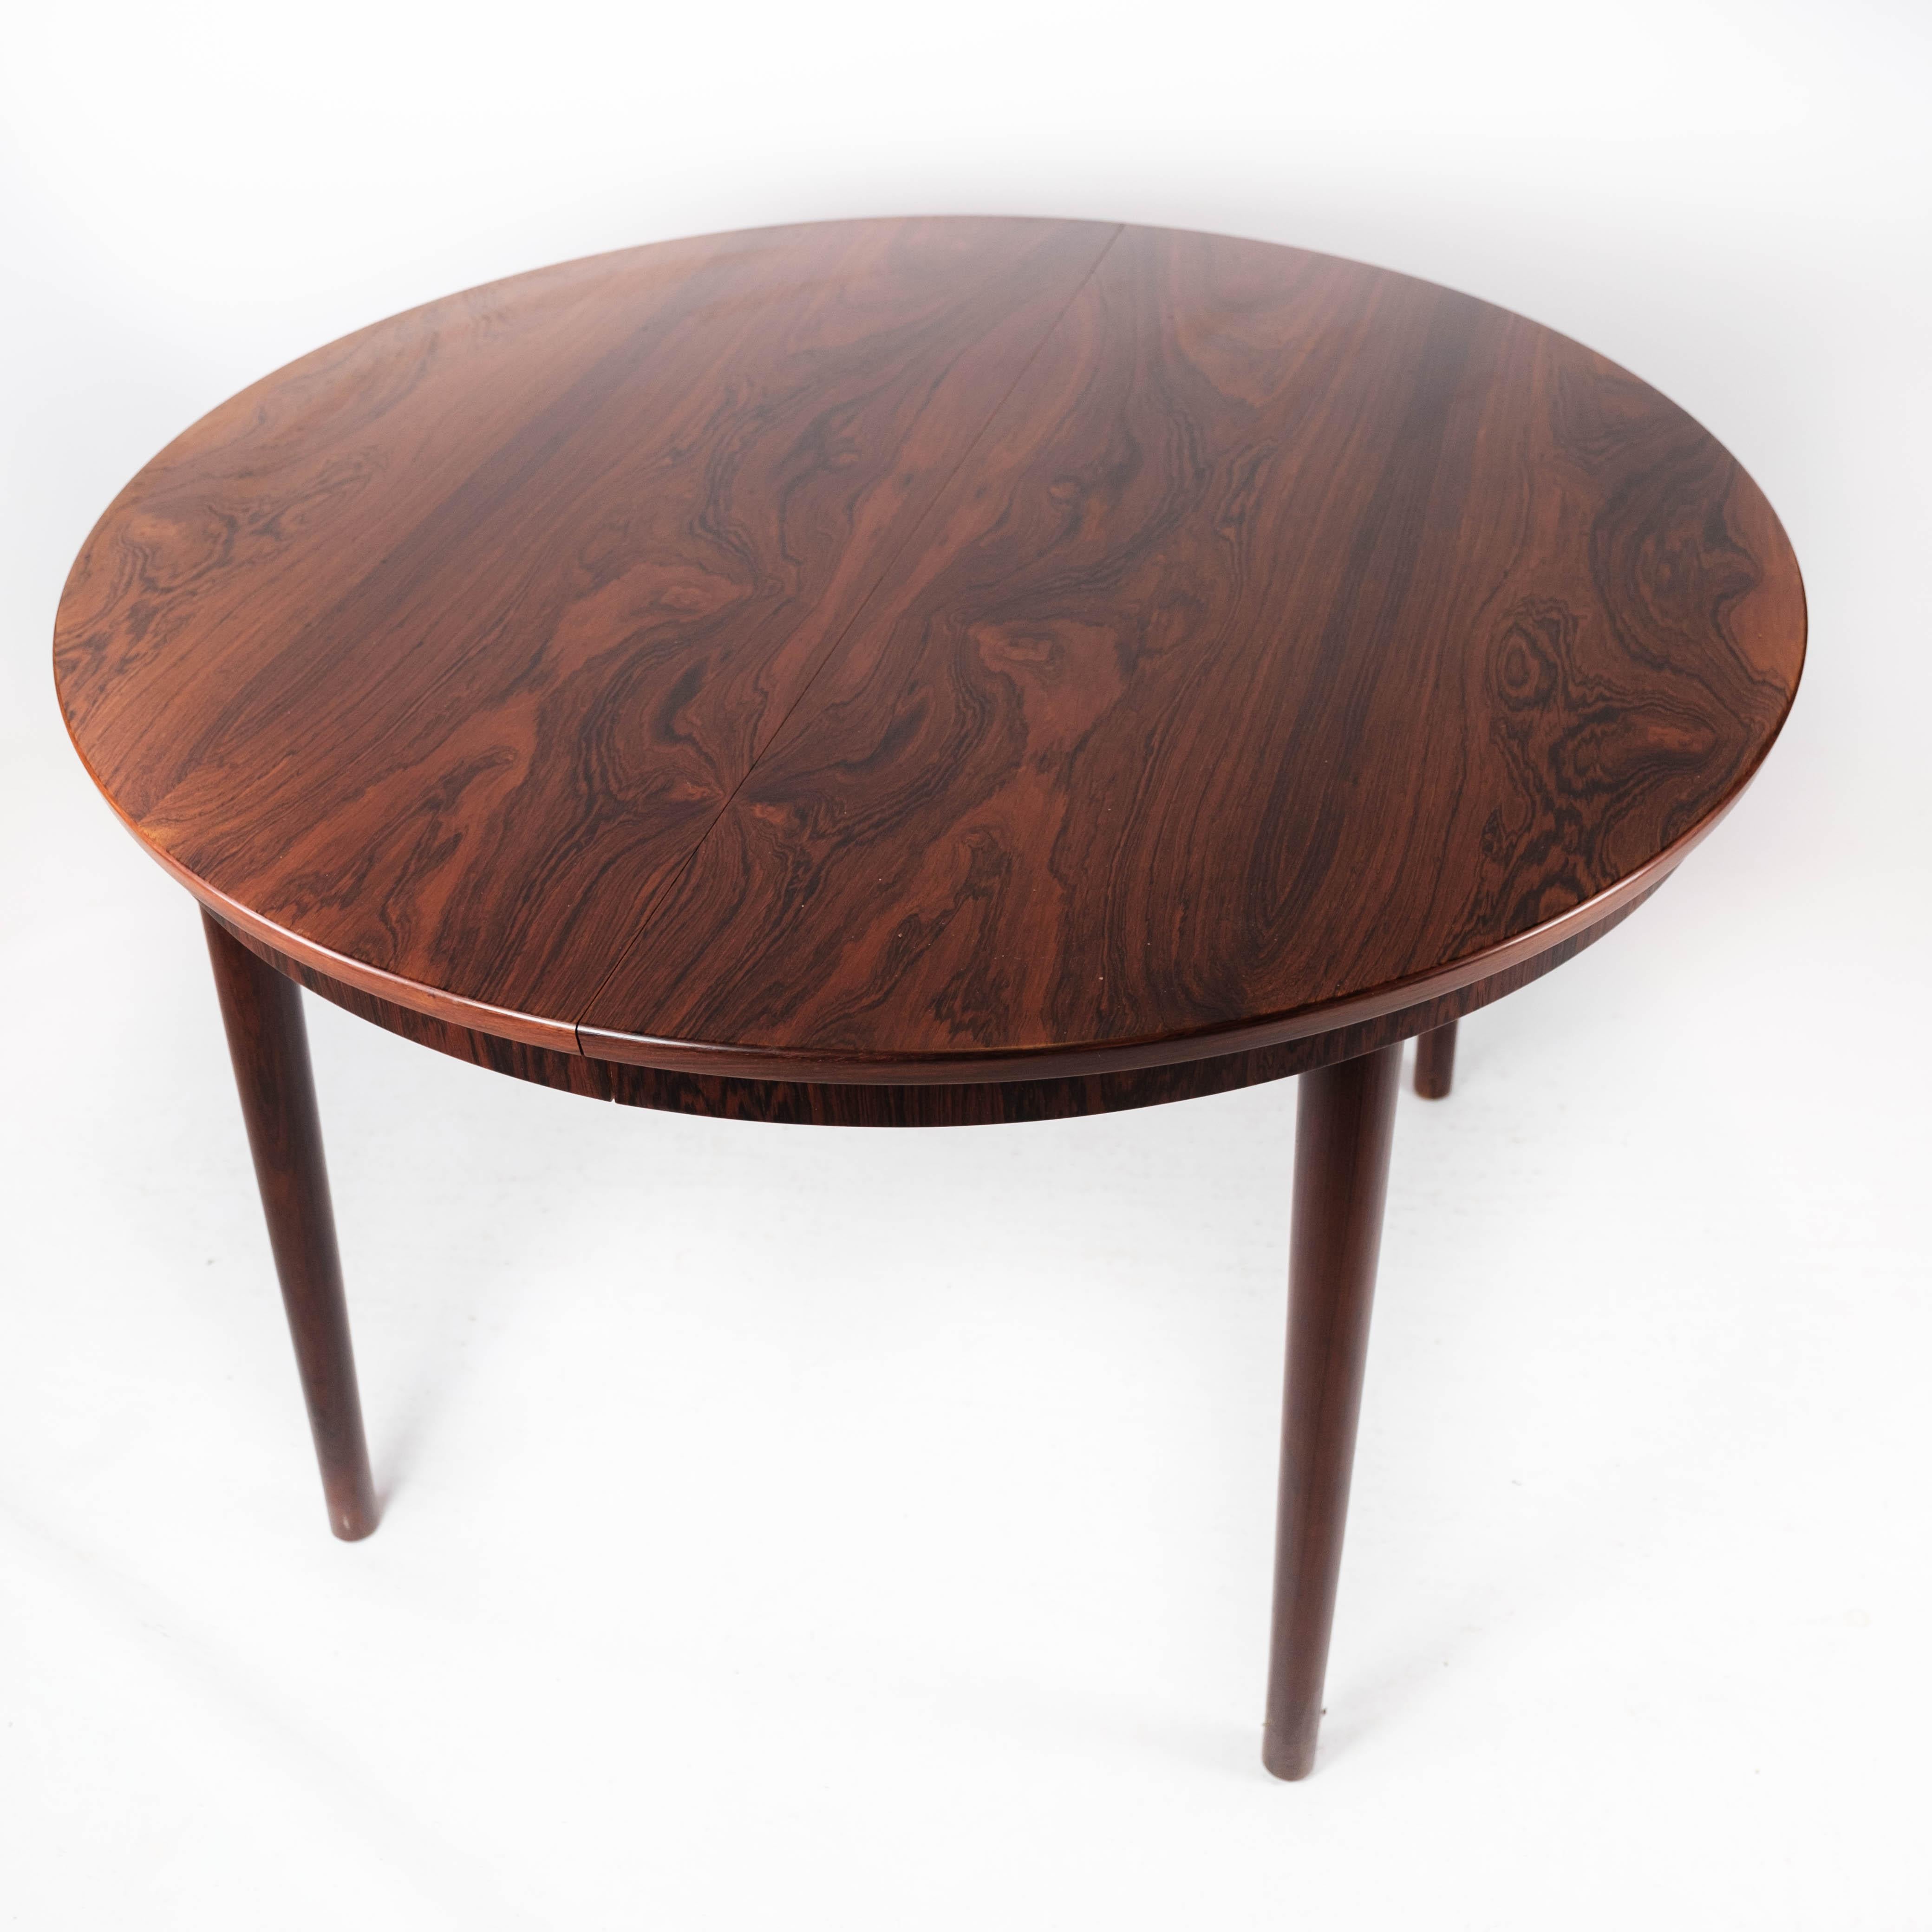 Round dining table in rosewood of Danish design from the 1960s. The table is in great vintage condition.